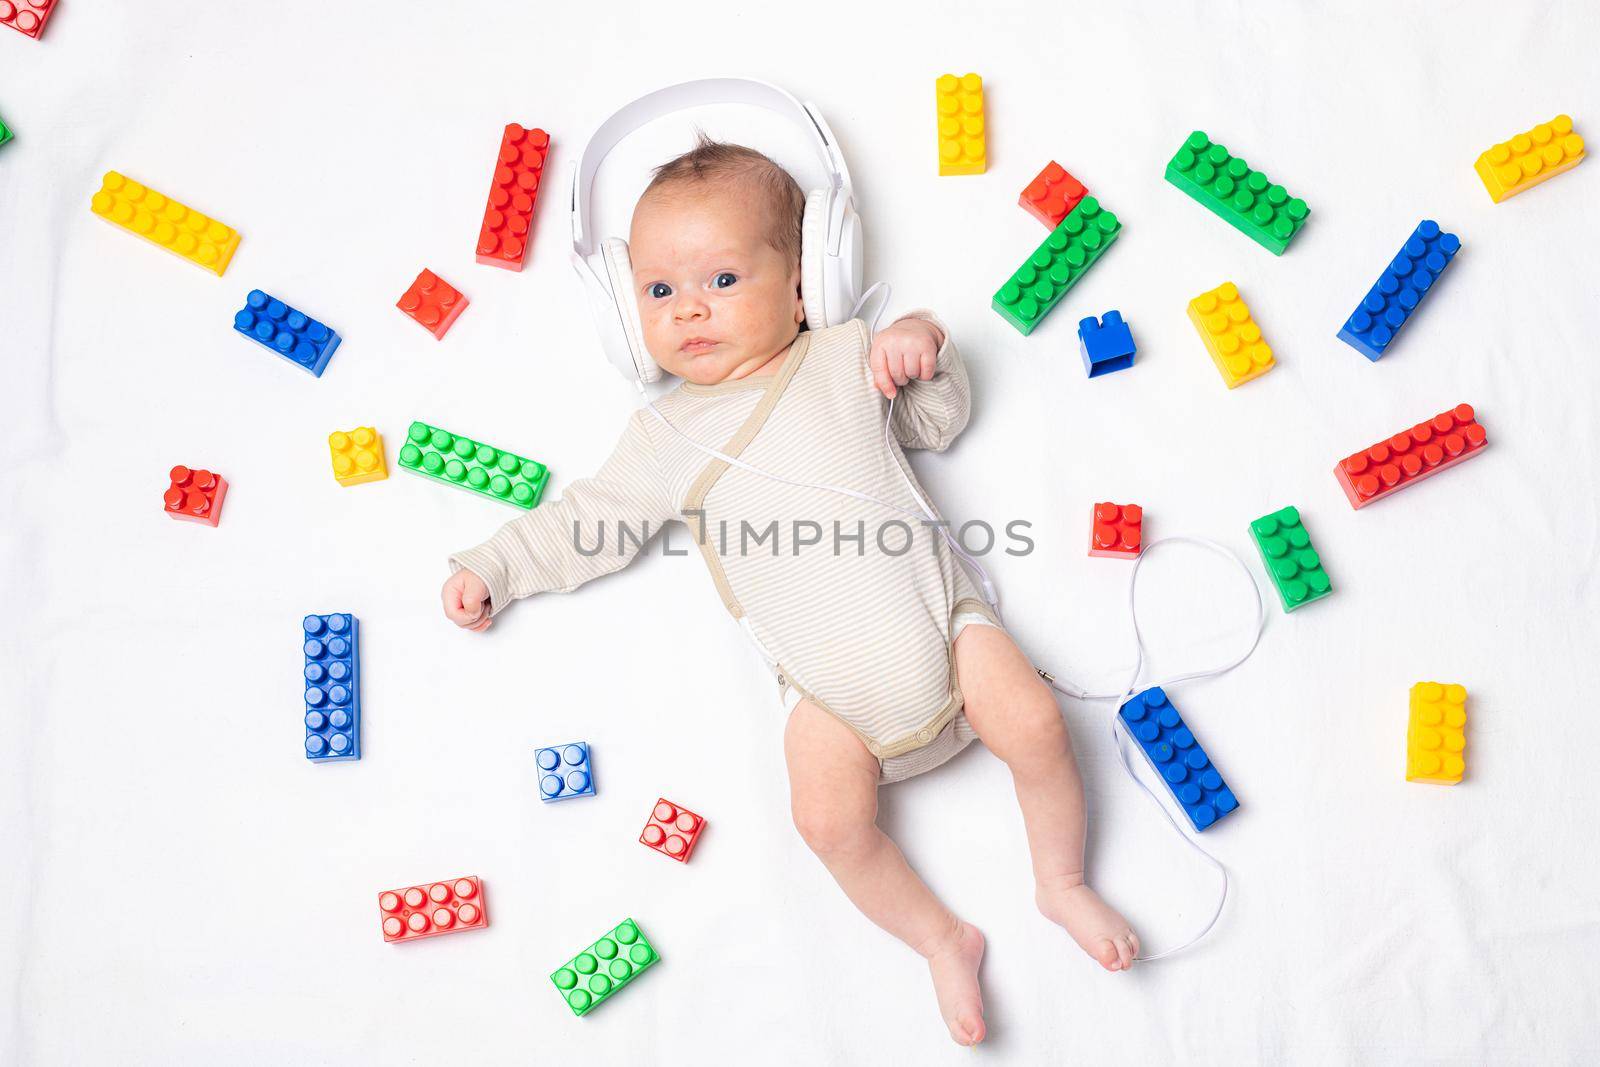 The baby is lying in toys . An article about children's toys. A selection of toys for kids. by alenka2194